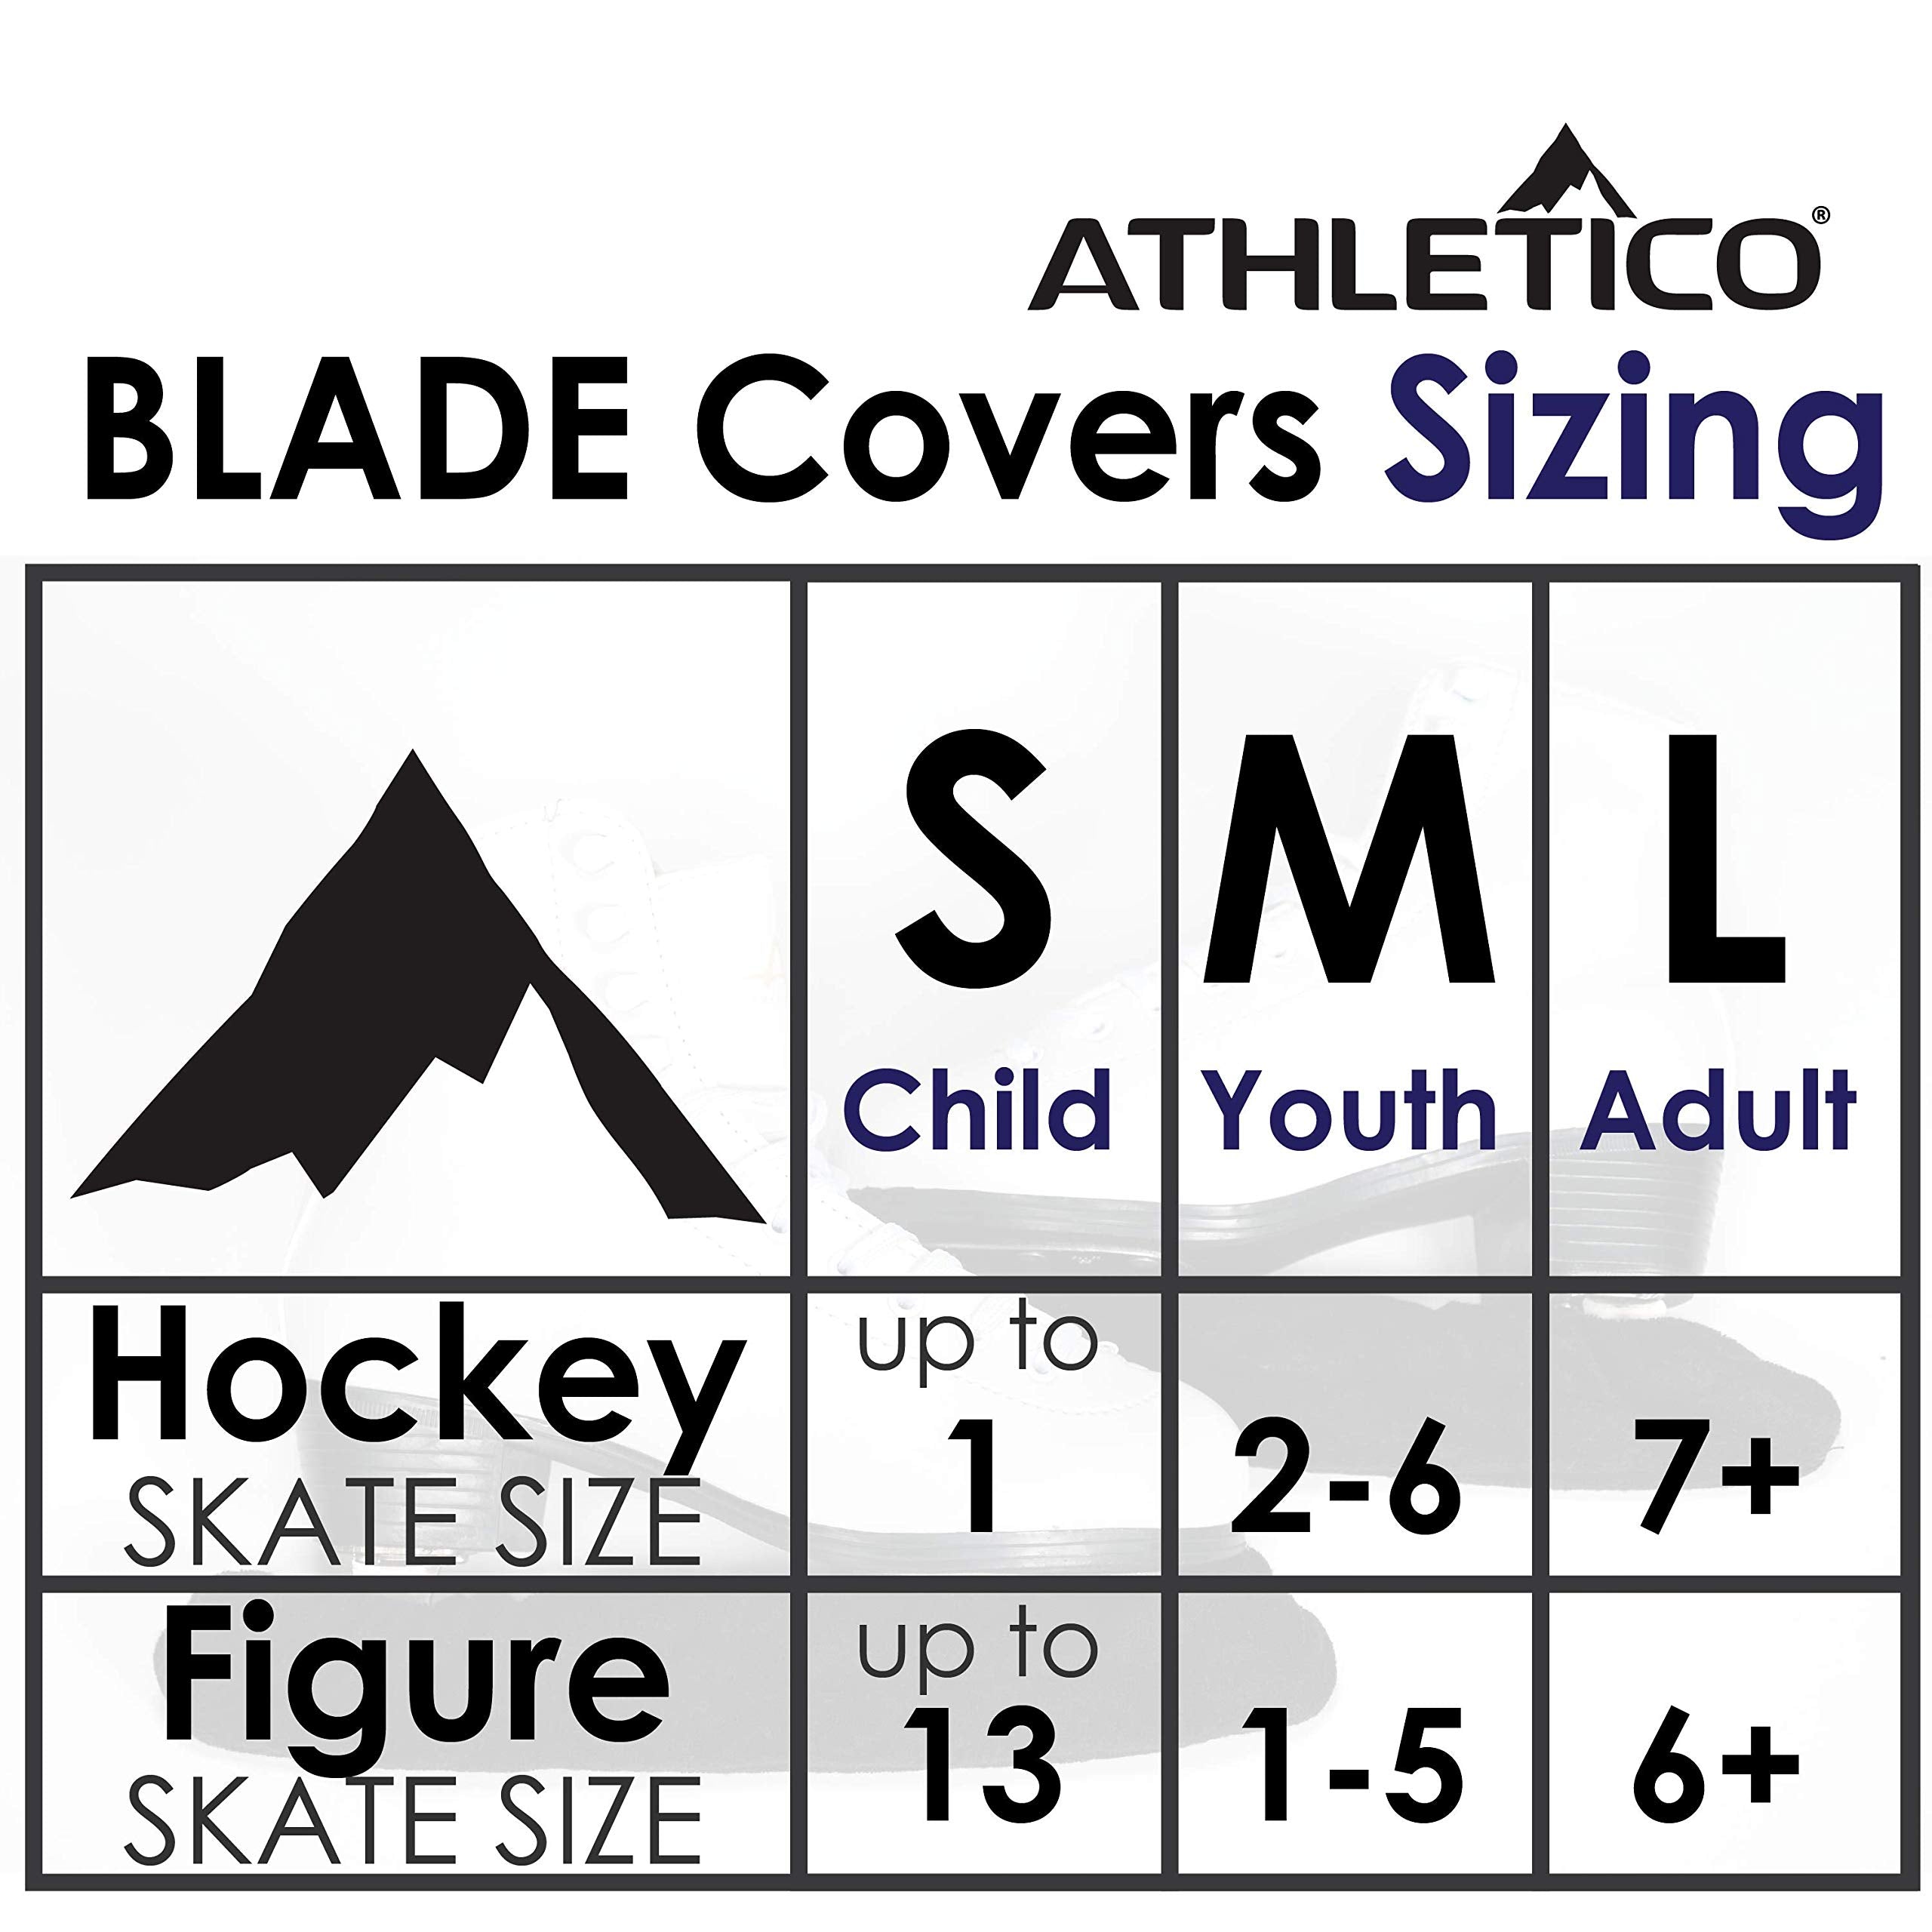 Athletico Ice Skate Blade Covers - Guards for Hockey Skates, Figure Skates, and Ice Skates - Skating Soakers Cover Blades from Youth to Adult Size - Men, Women, & Kids  - Acceptable